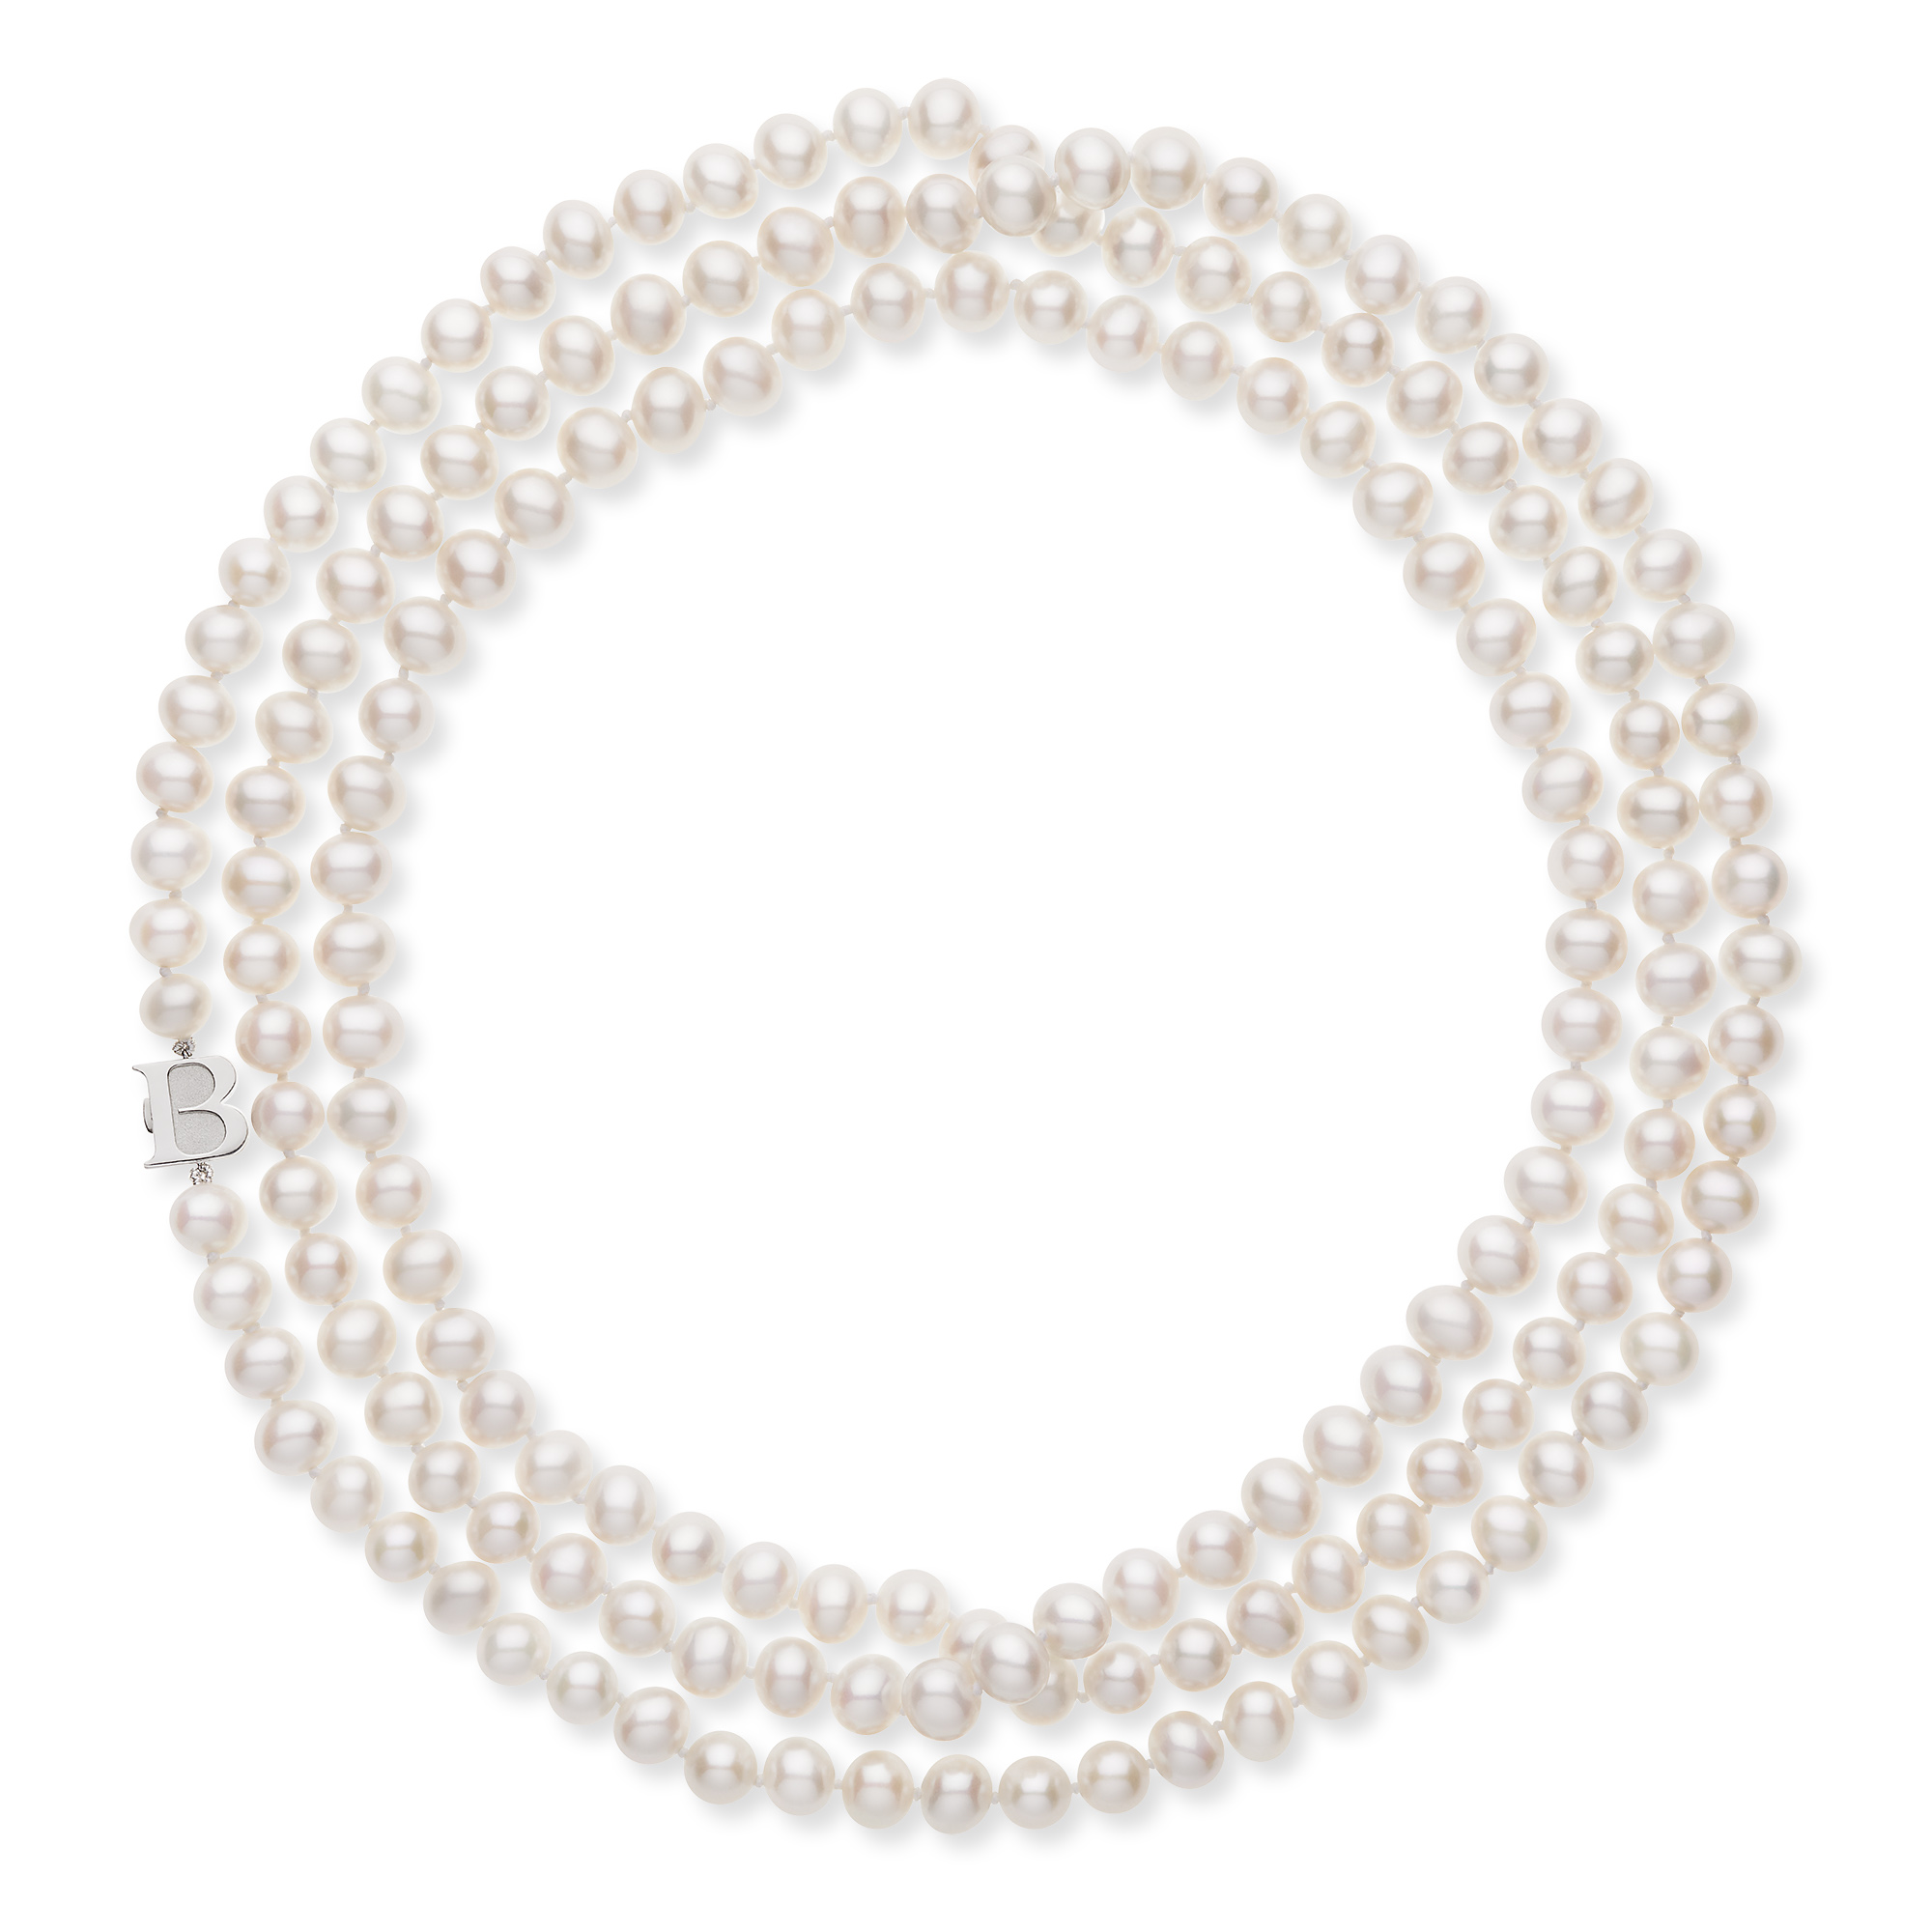 Birks 7.5-8 mm Silver Cultured Freshwater Pearl Necklace